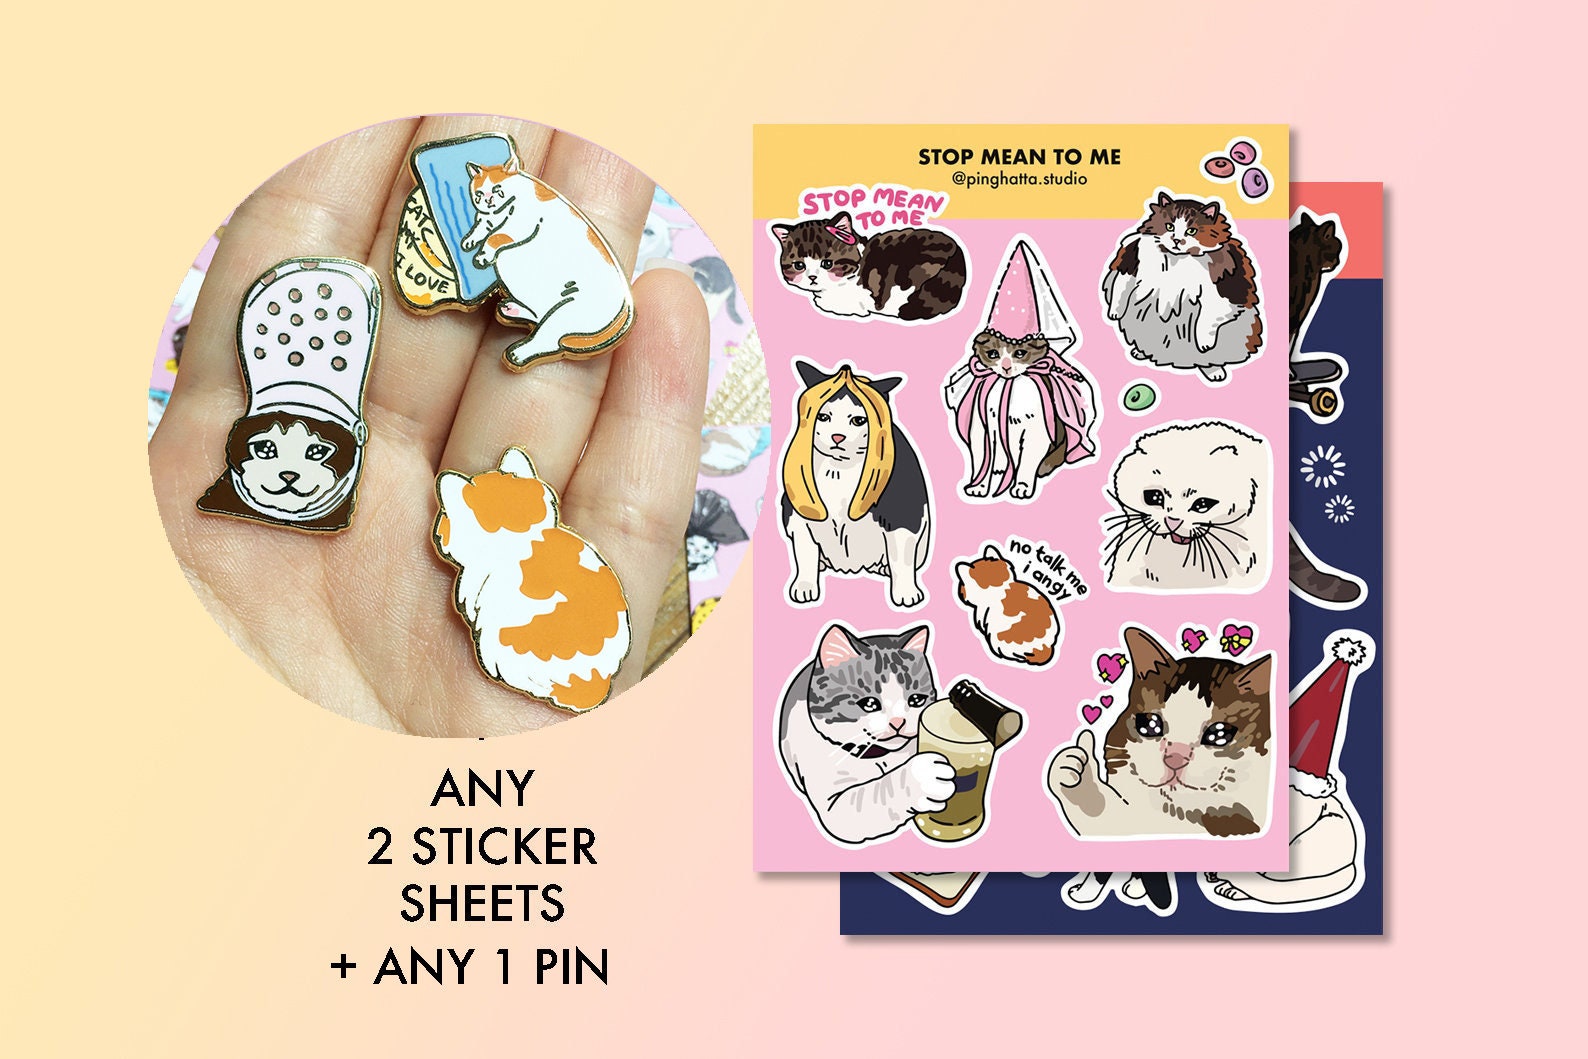 Clothing & Accessories :: Clothing Accessories :: Patches & Pins :: 1.45  Striped Fat Cat - Metal Button Pin, Tinplate Pins for Backpacks and Bags,  Round Circle Lapel Button Badge for Cat